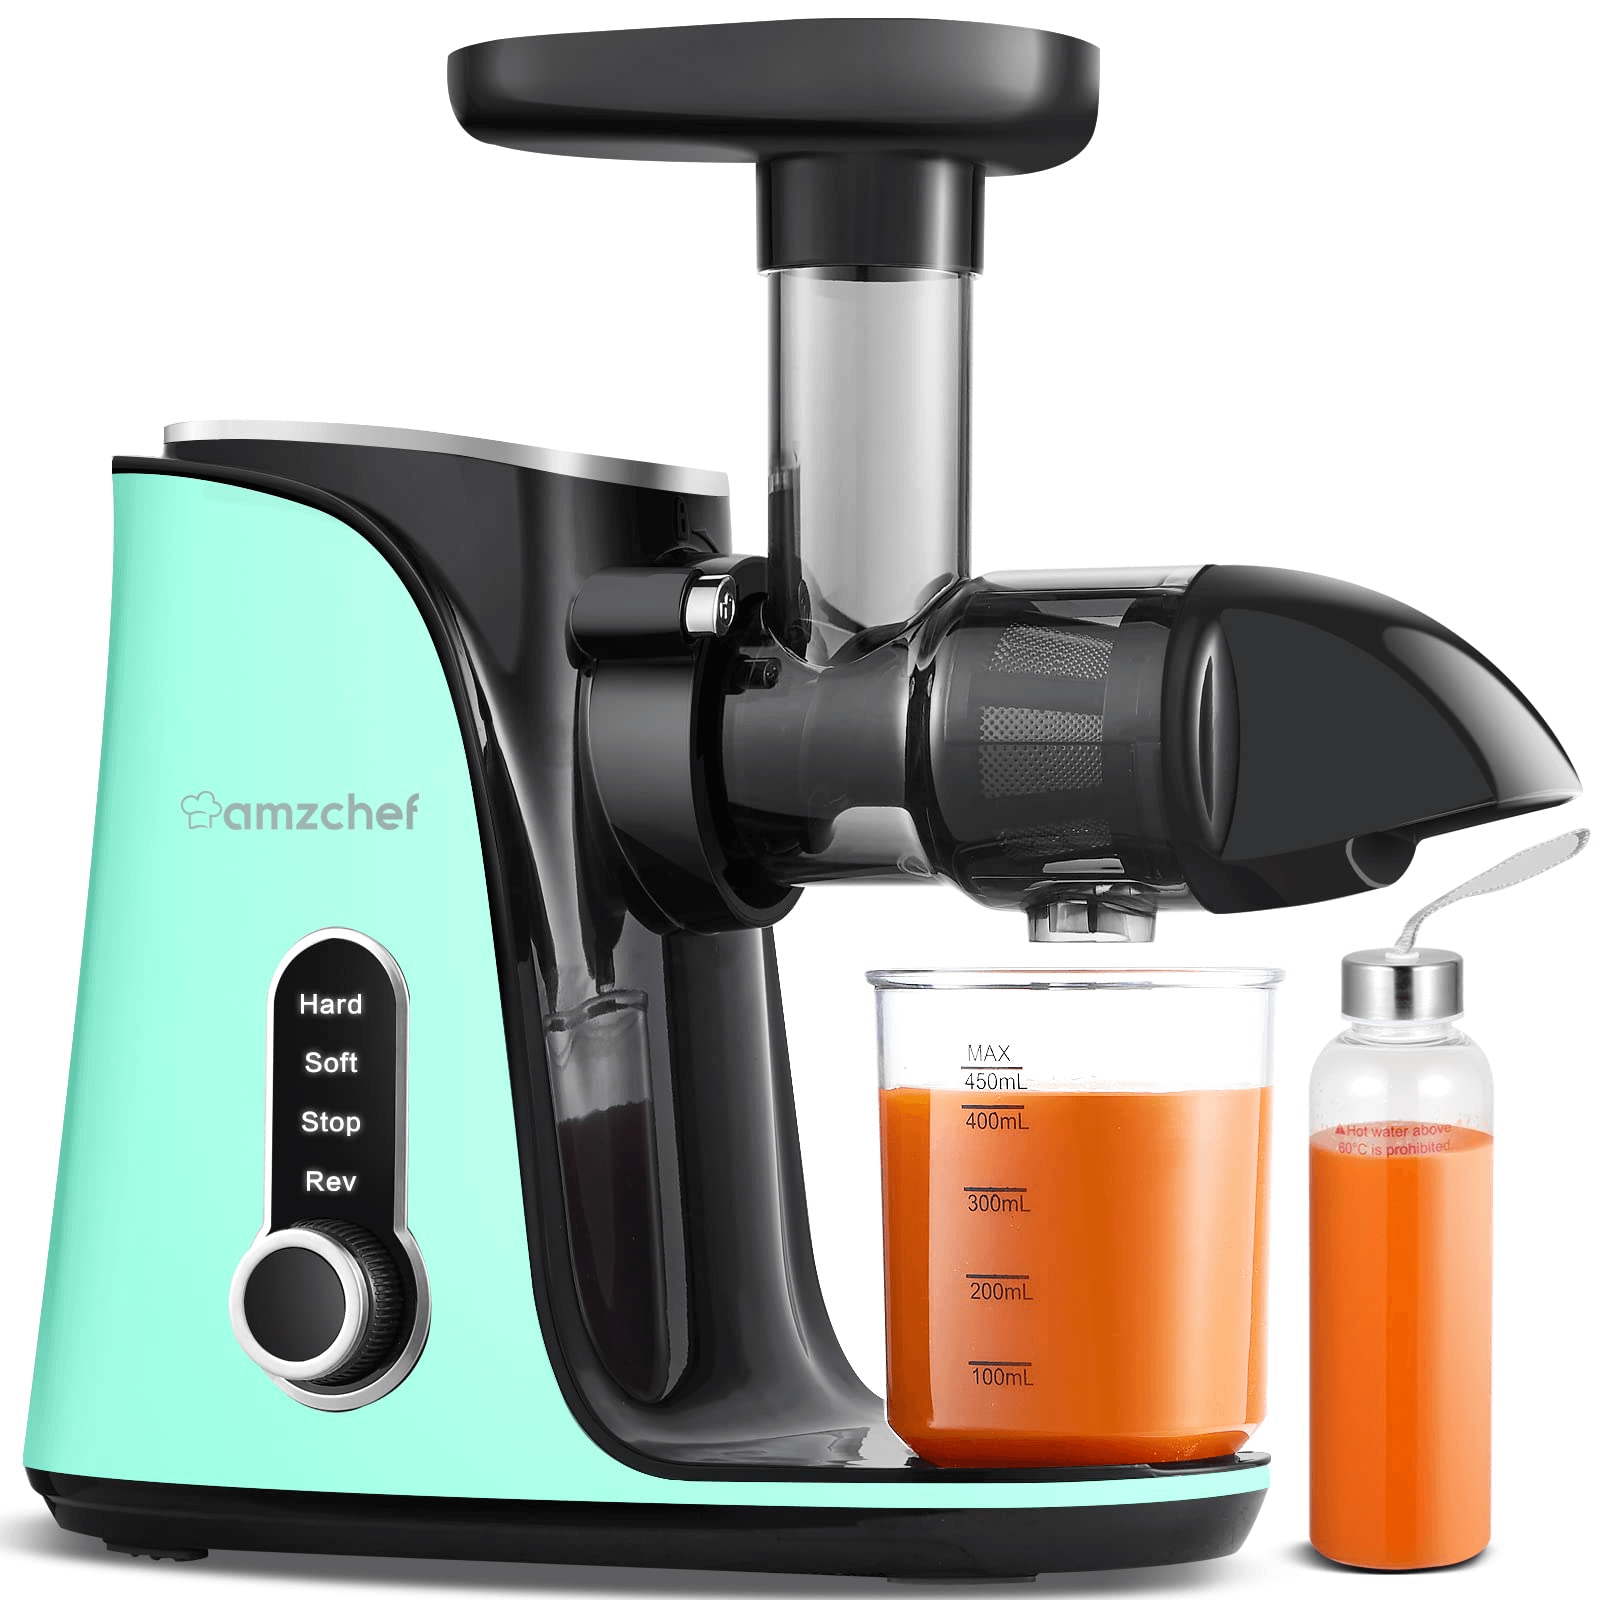 AMZCHEF Slow Juicer for Fruit and Vegetables Powerful Juicer GM3001 Green